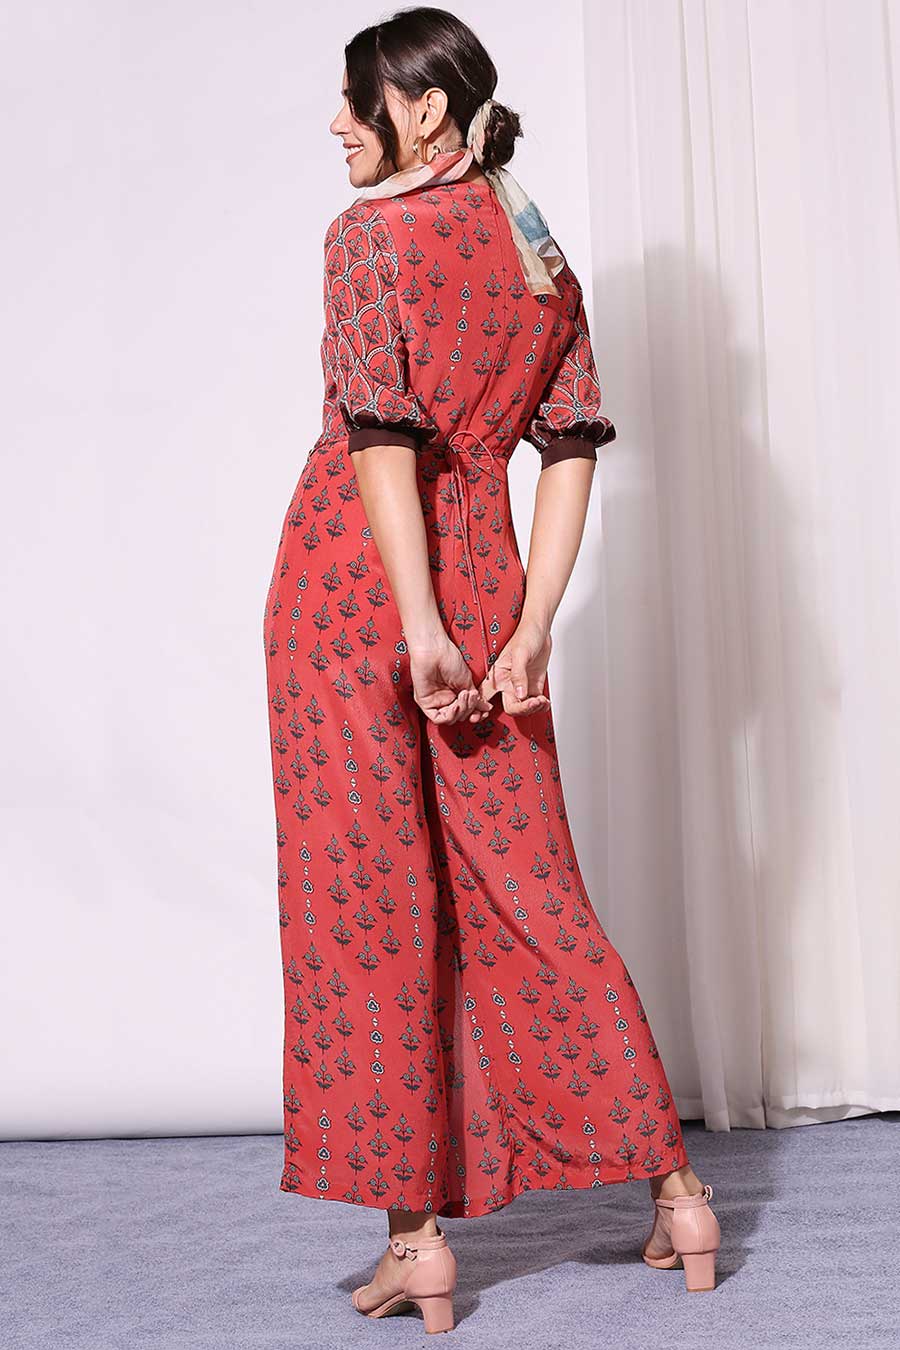 Red Overlap Jumpsuit With Leather Belt